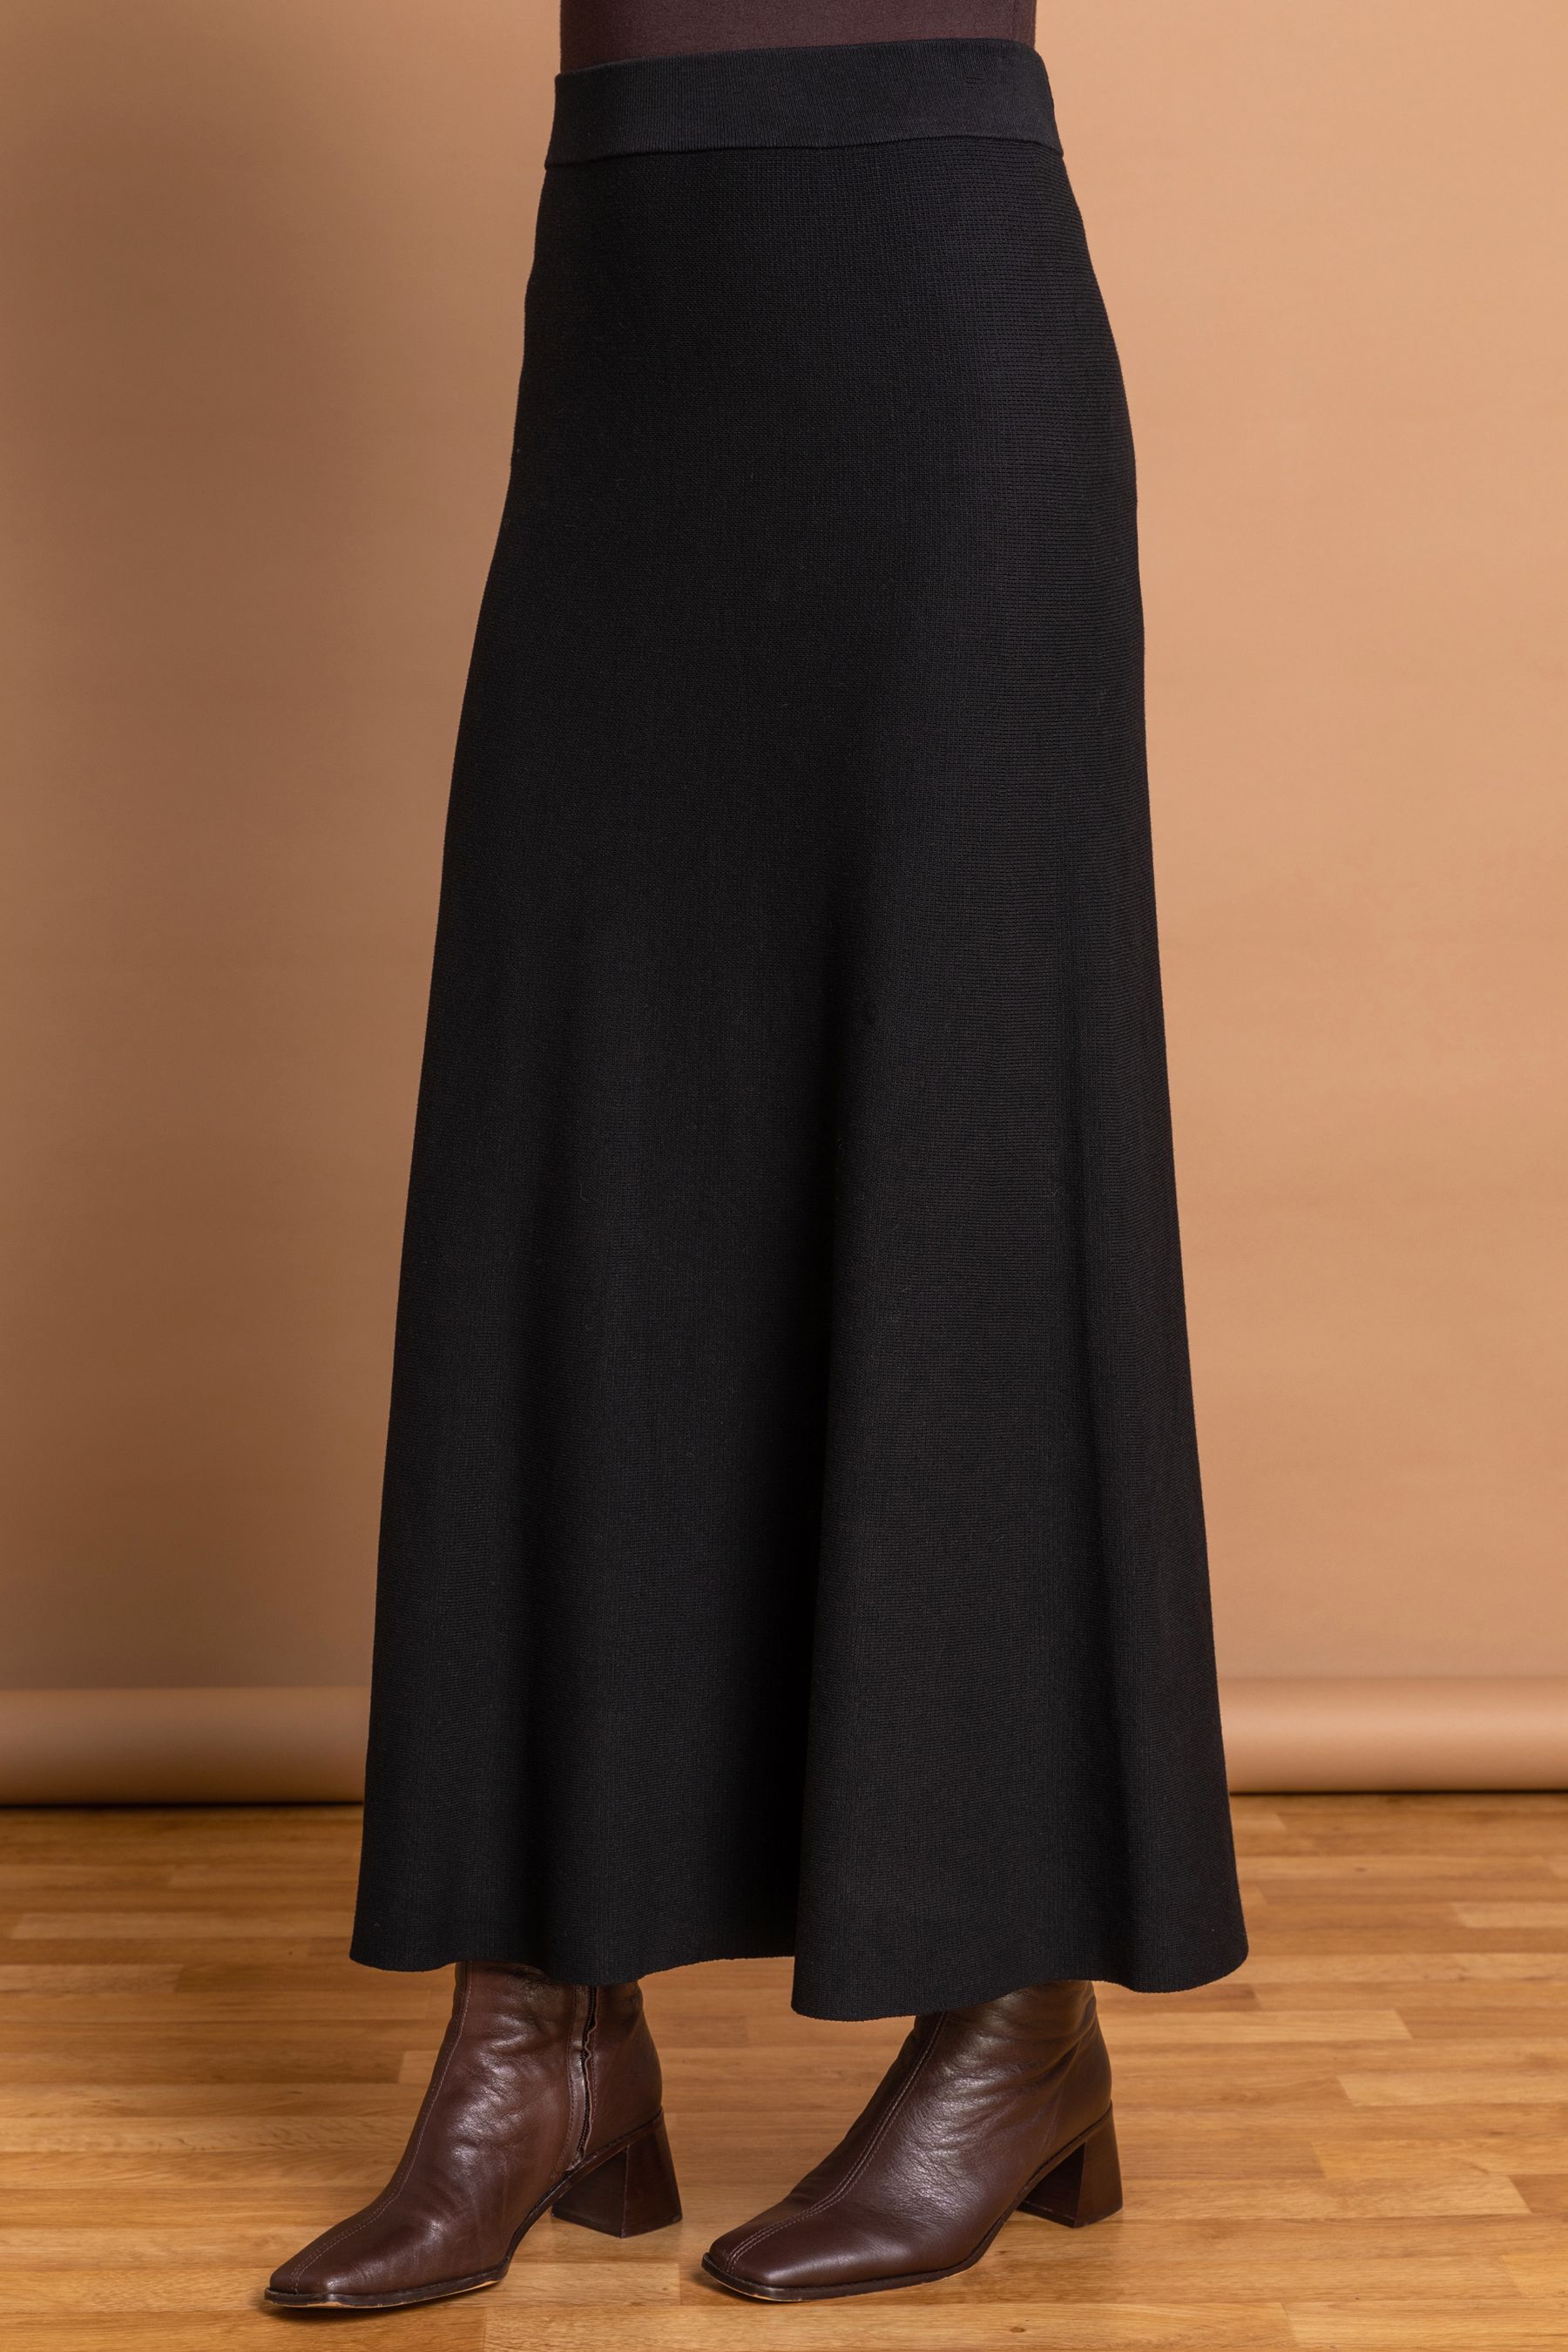 Buy Roman Black Plain Knitted Maxi Skirt from the Next UK online shop